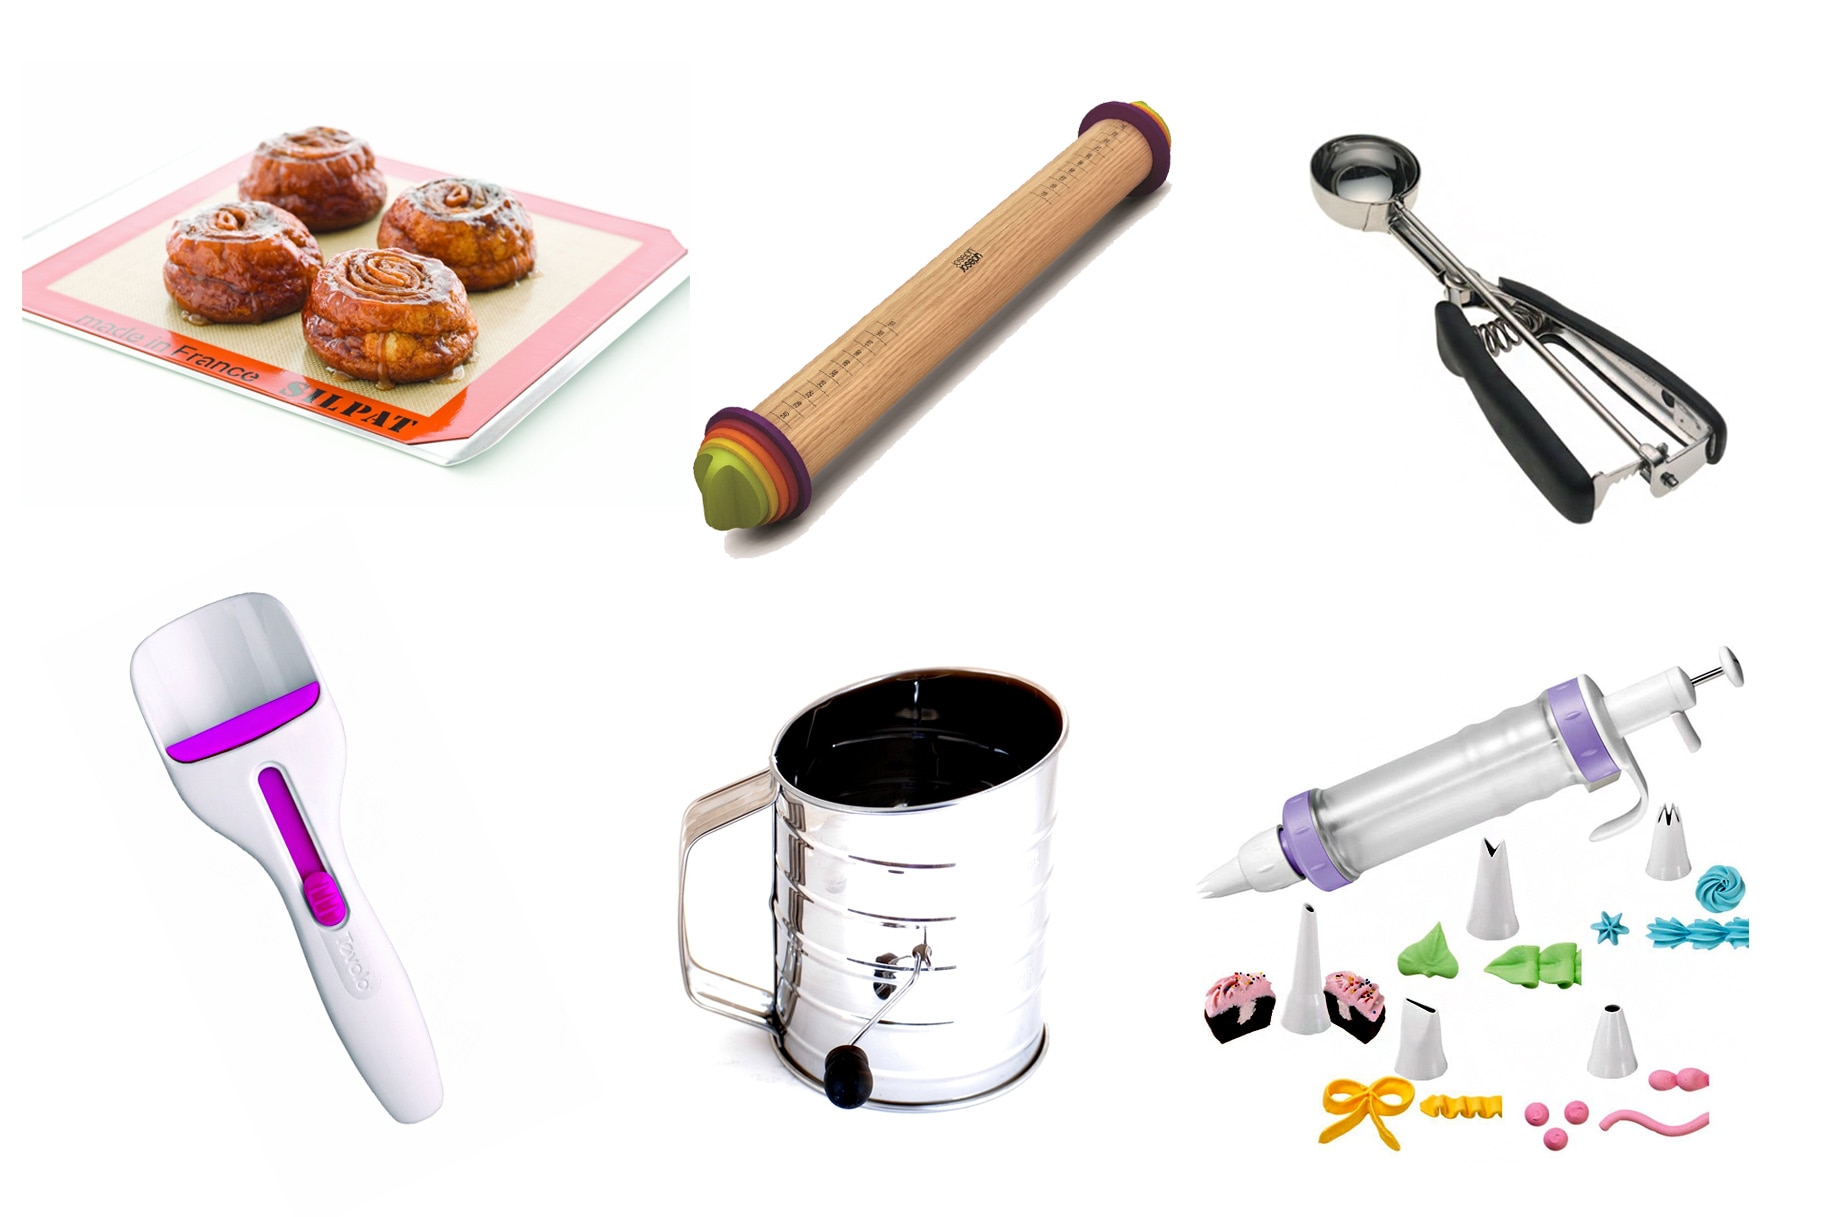 Baking Utensils, Tools and Gadgets